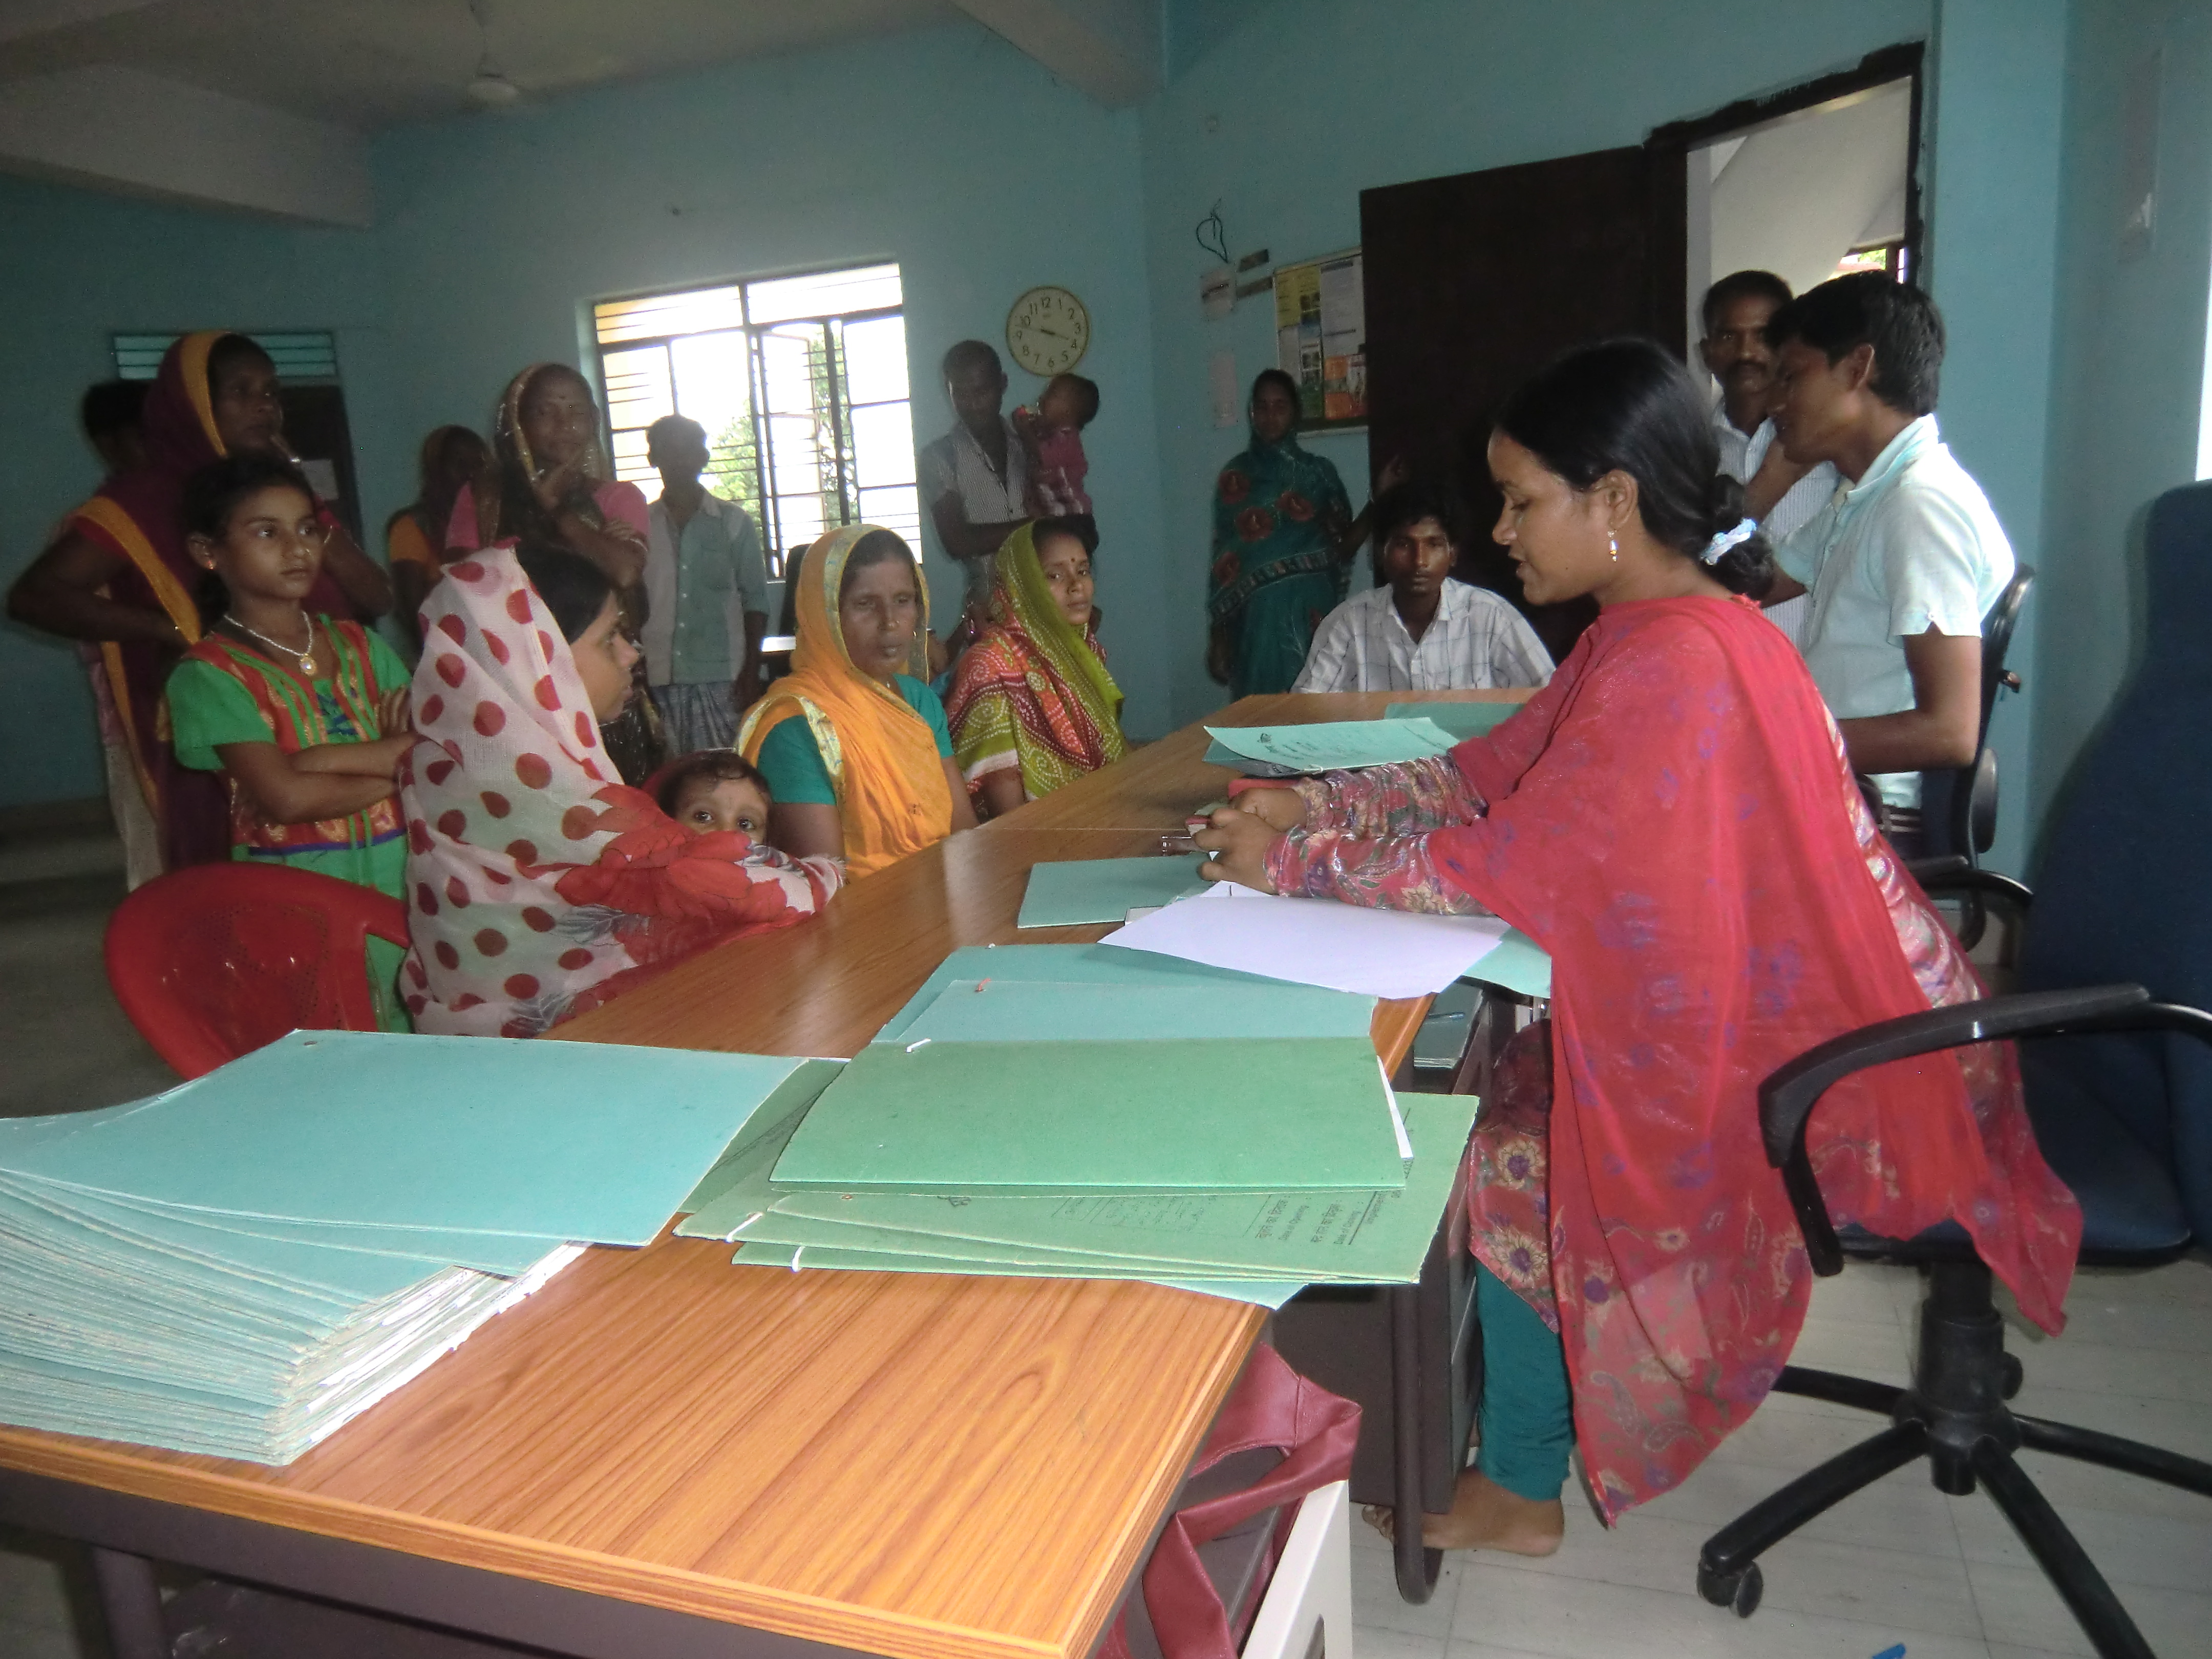 A counselling session of the Mahila Dastak group underway in Kishanganj, Bihar. An initiative of the NGO Rapid Act for Human Advancement Training (RAHAT), the Mahila Dastak groups - each comprising 15-20 women volunteers - in Kishanganj and five other districts covering 120 villages, have been formed to help victims of domestic violence. (Credit: Ajitha Menon\WFS)